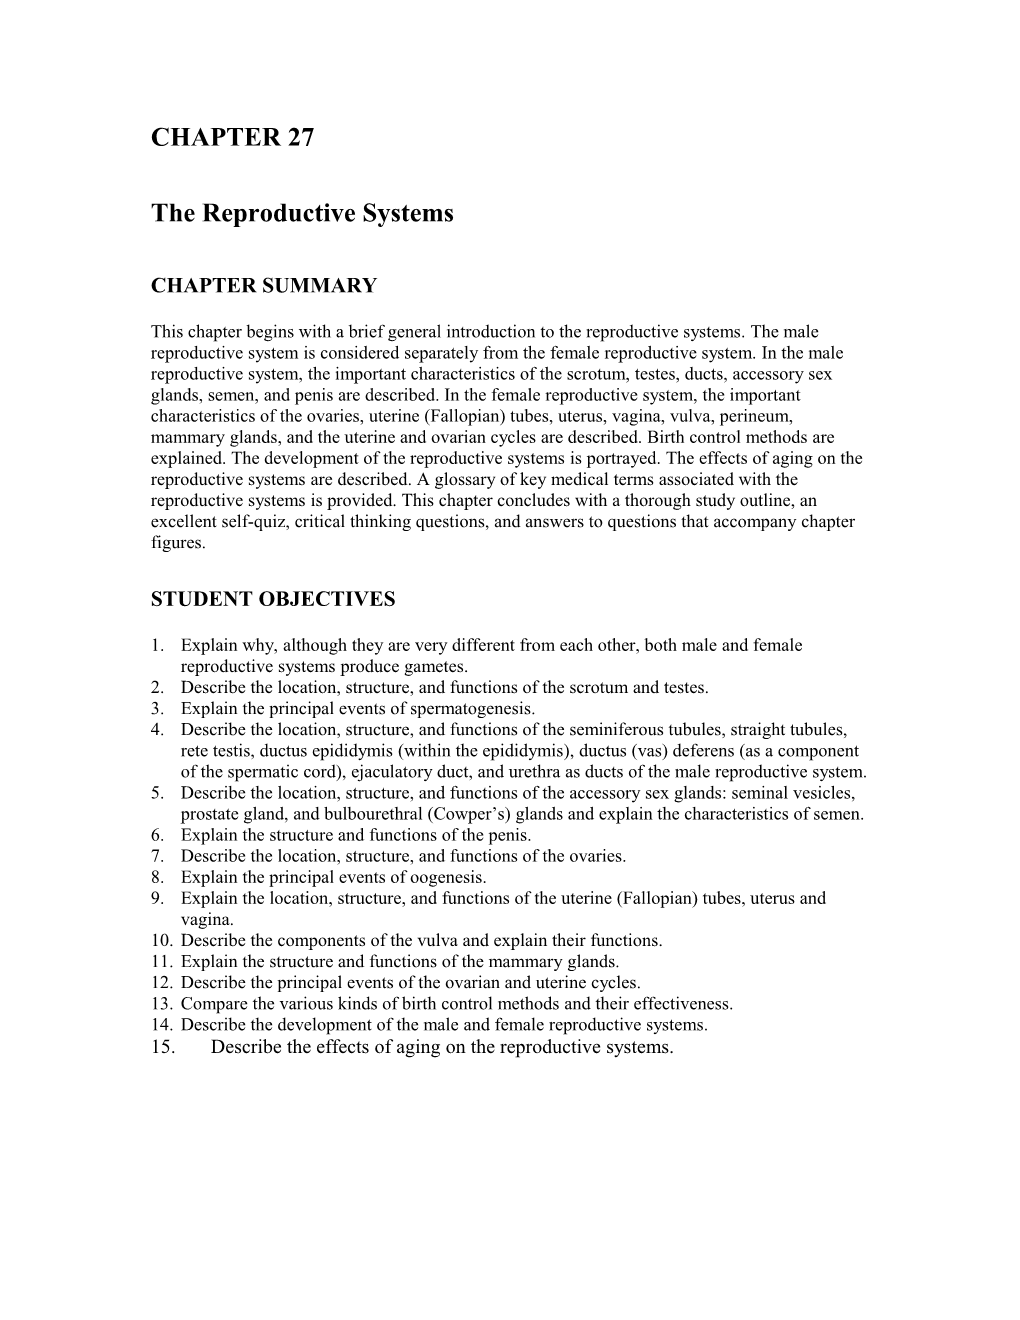 The Reproductive Systems s1